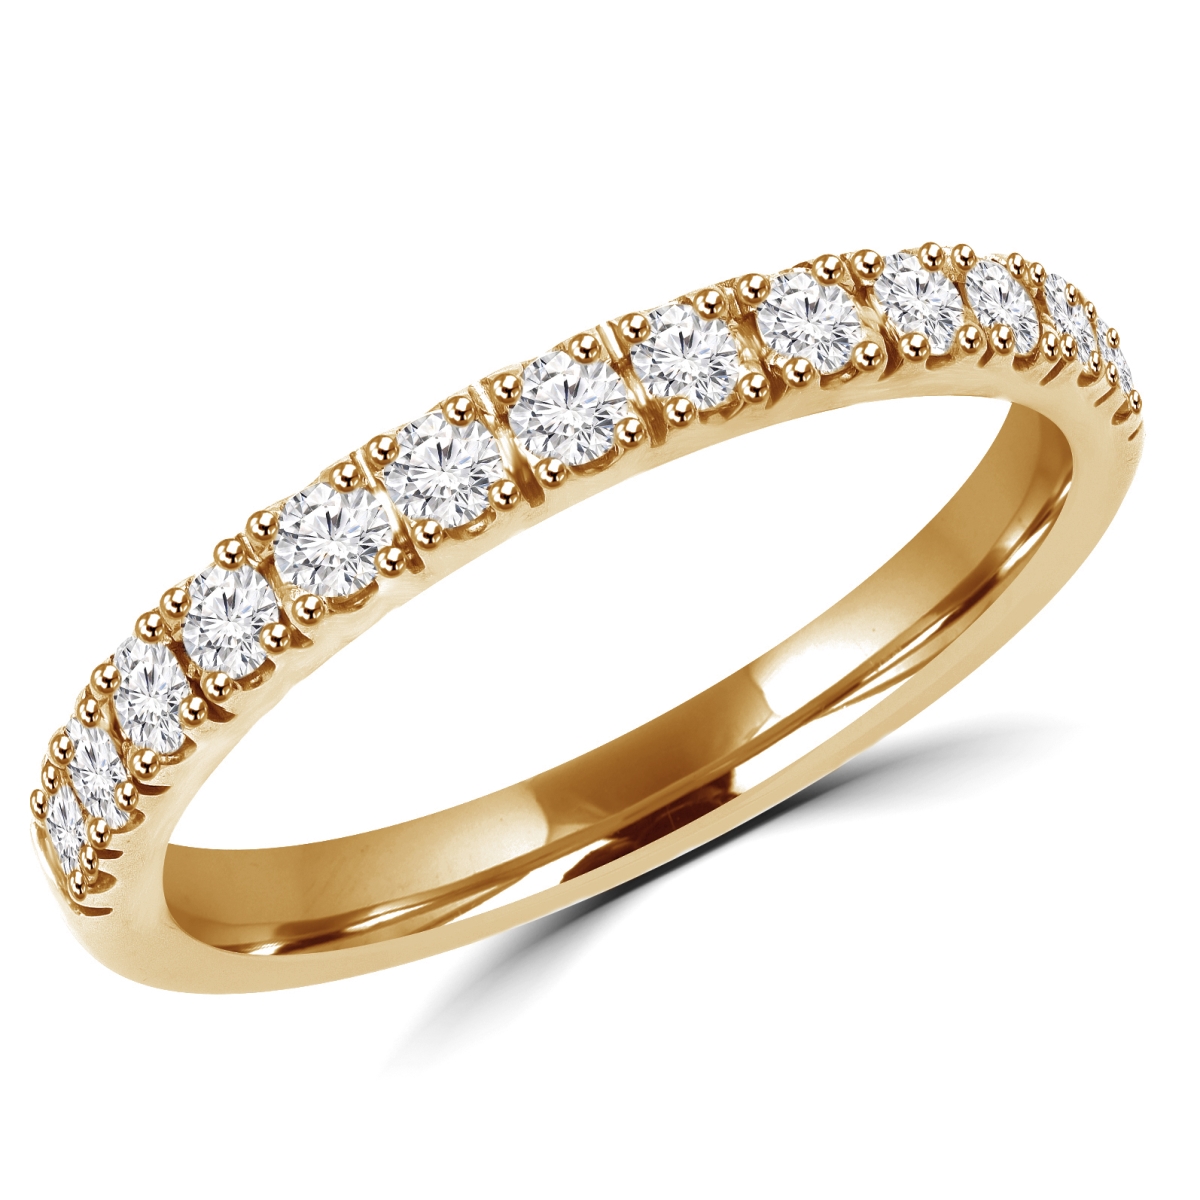 Picture of Majesty Diamonds MD180187-4.5 0.3 CTW Round Diamond Semi-Eternity Wedding Band Ring in 14K Yellow Gold - Size 4.5